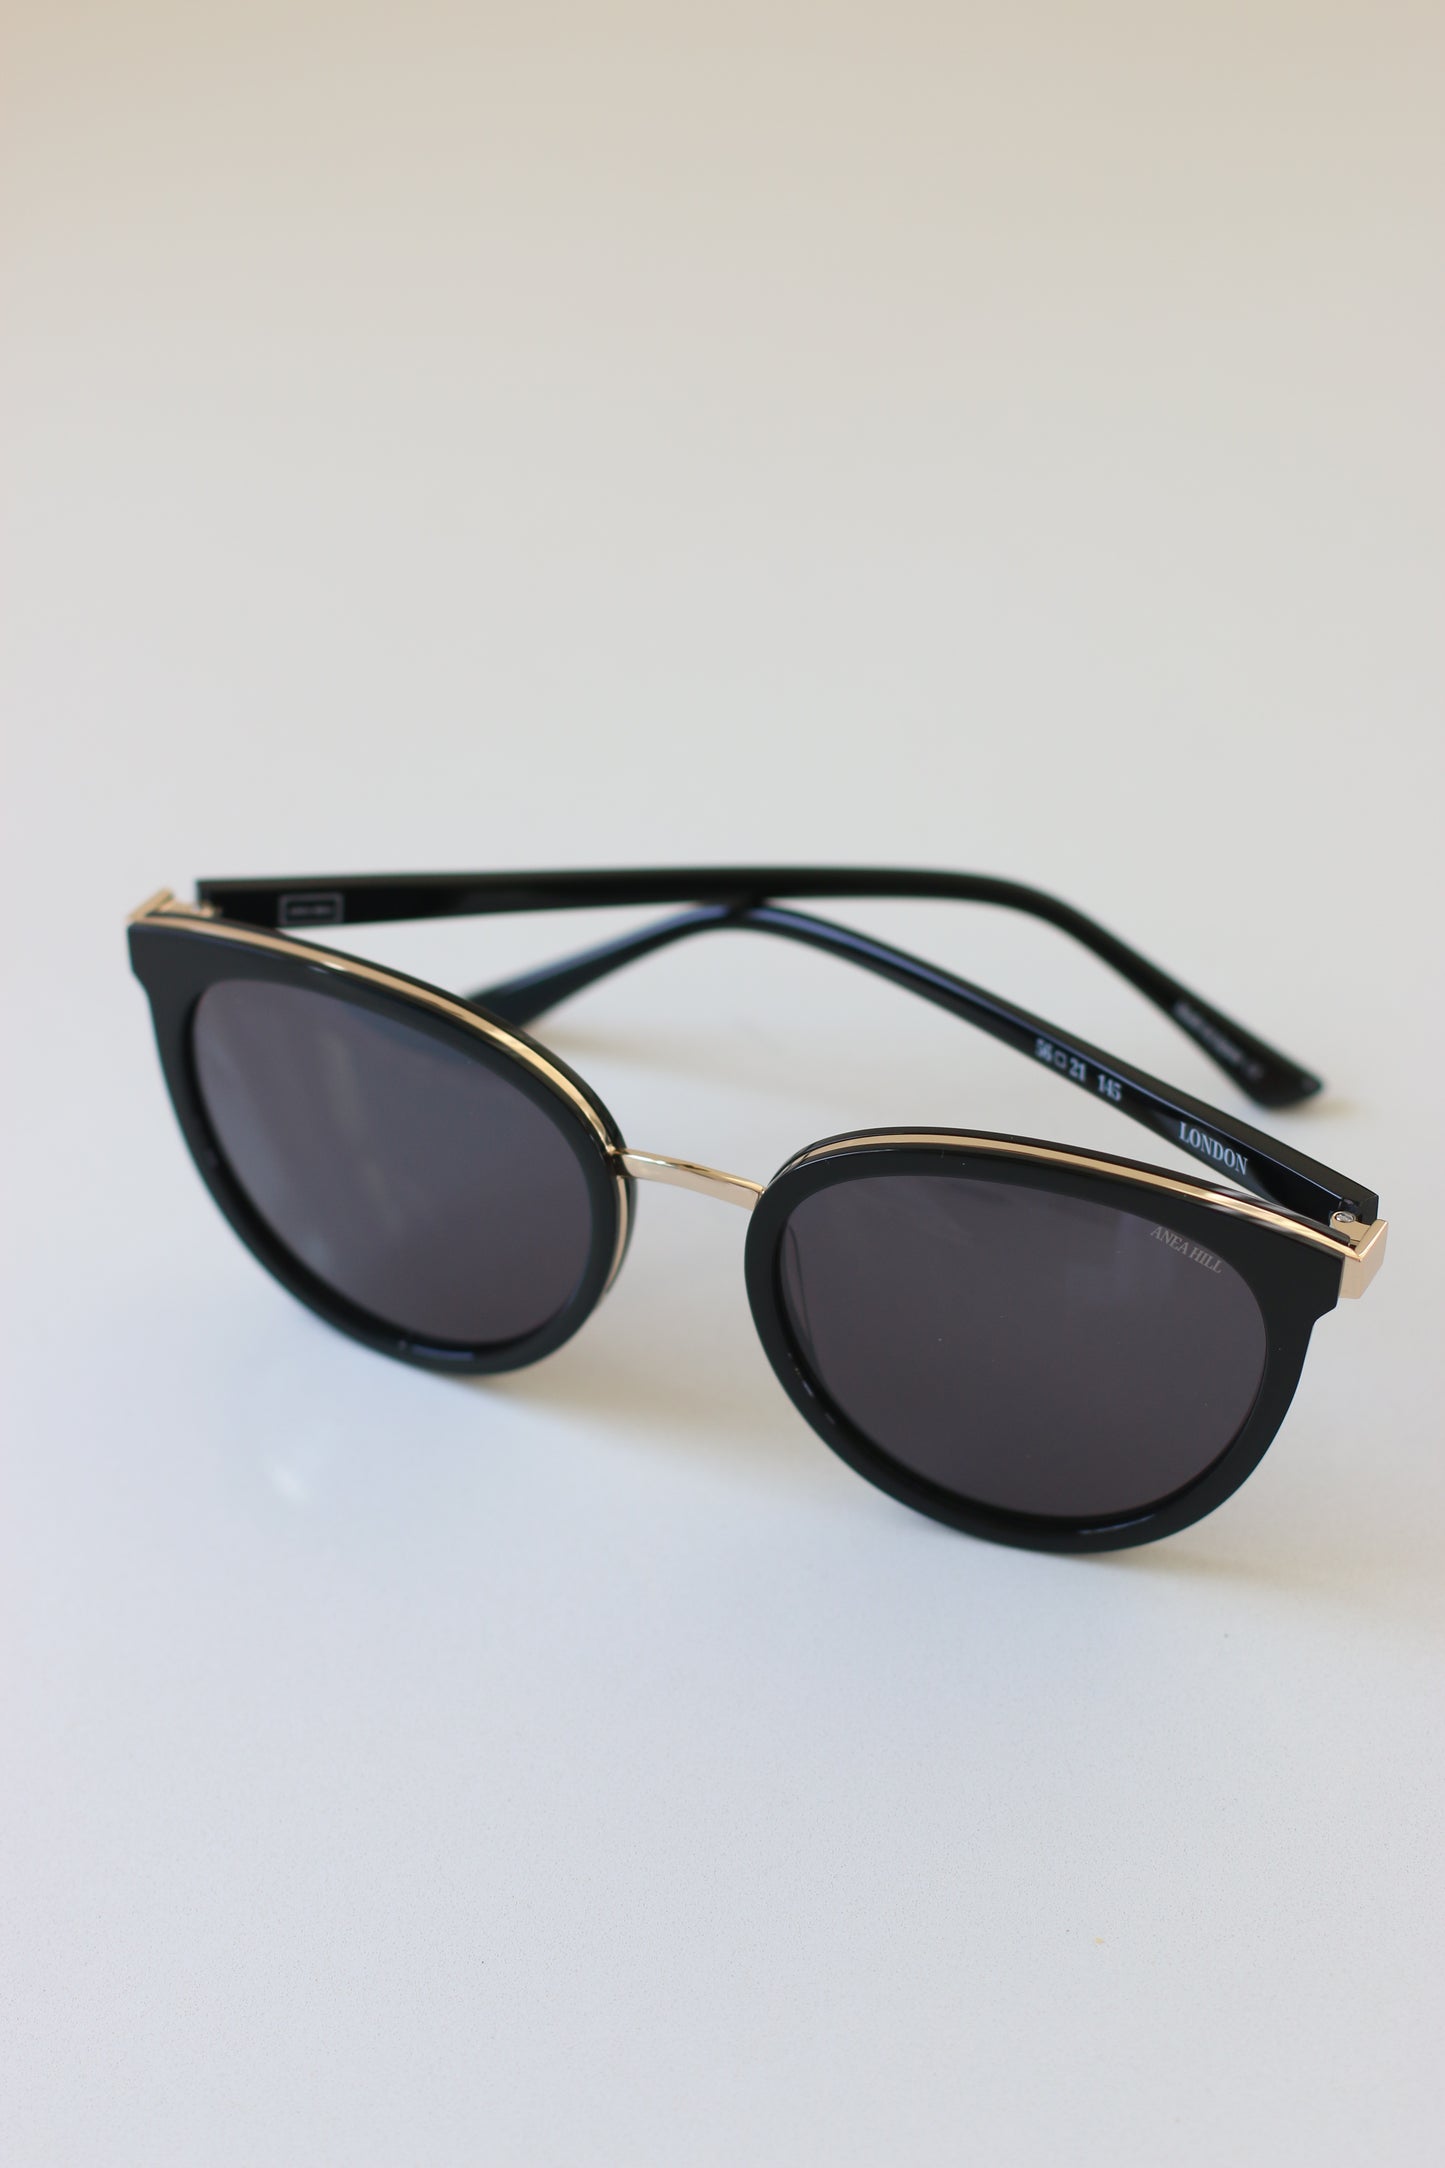 These stylish and elegant sunglasses boast a unique cat-eye shape and gold detailing for a glamorous look.